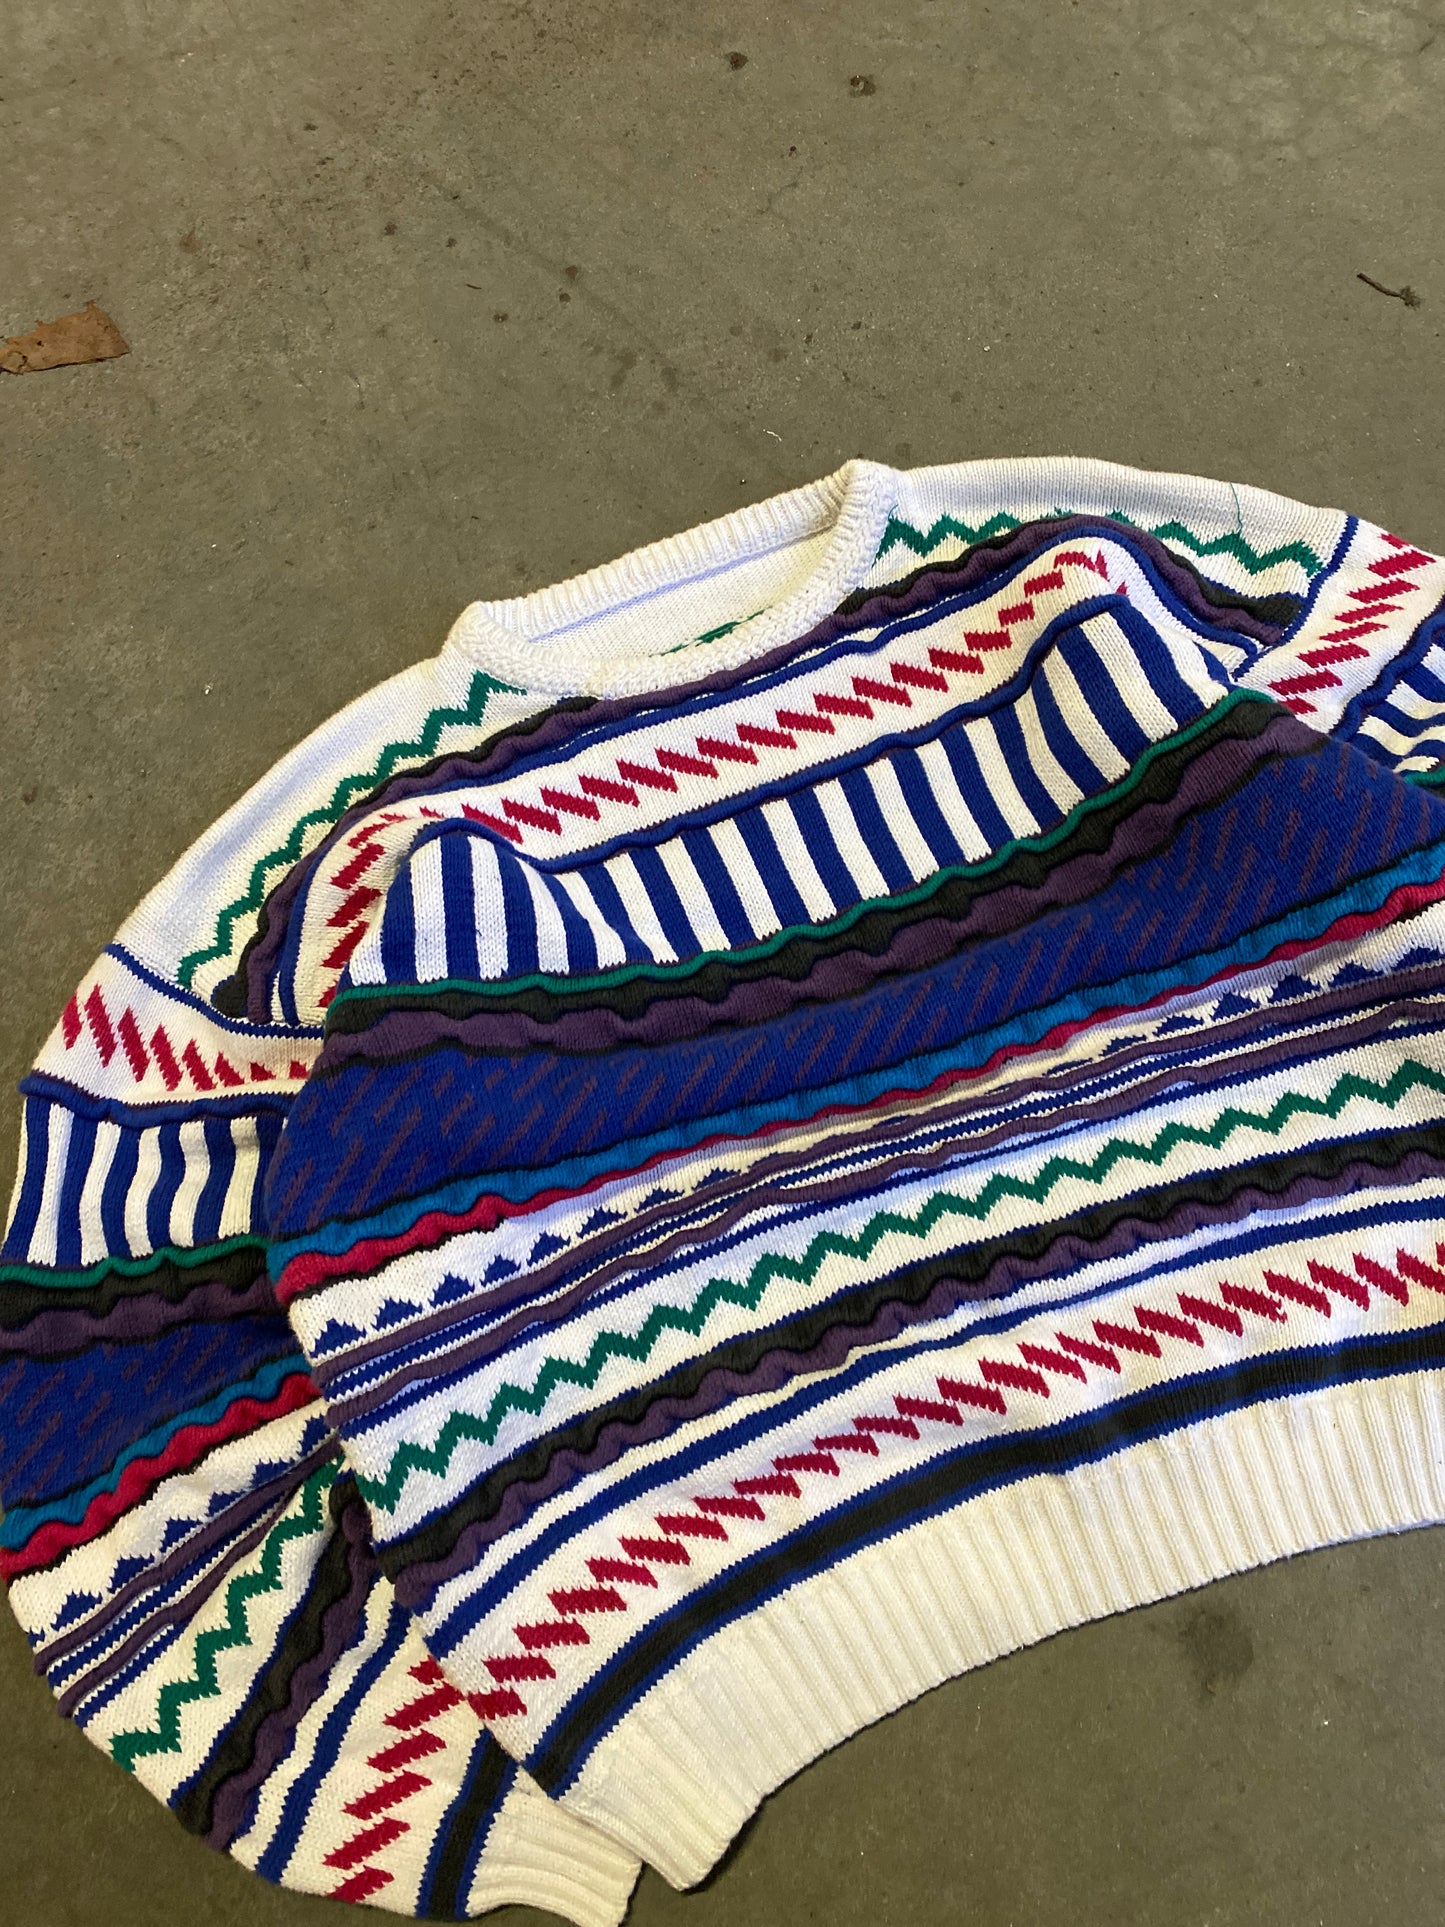 (M) Vintage Thick Boxy 3D Coogi Style Knit